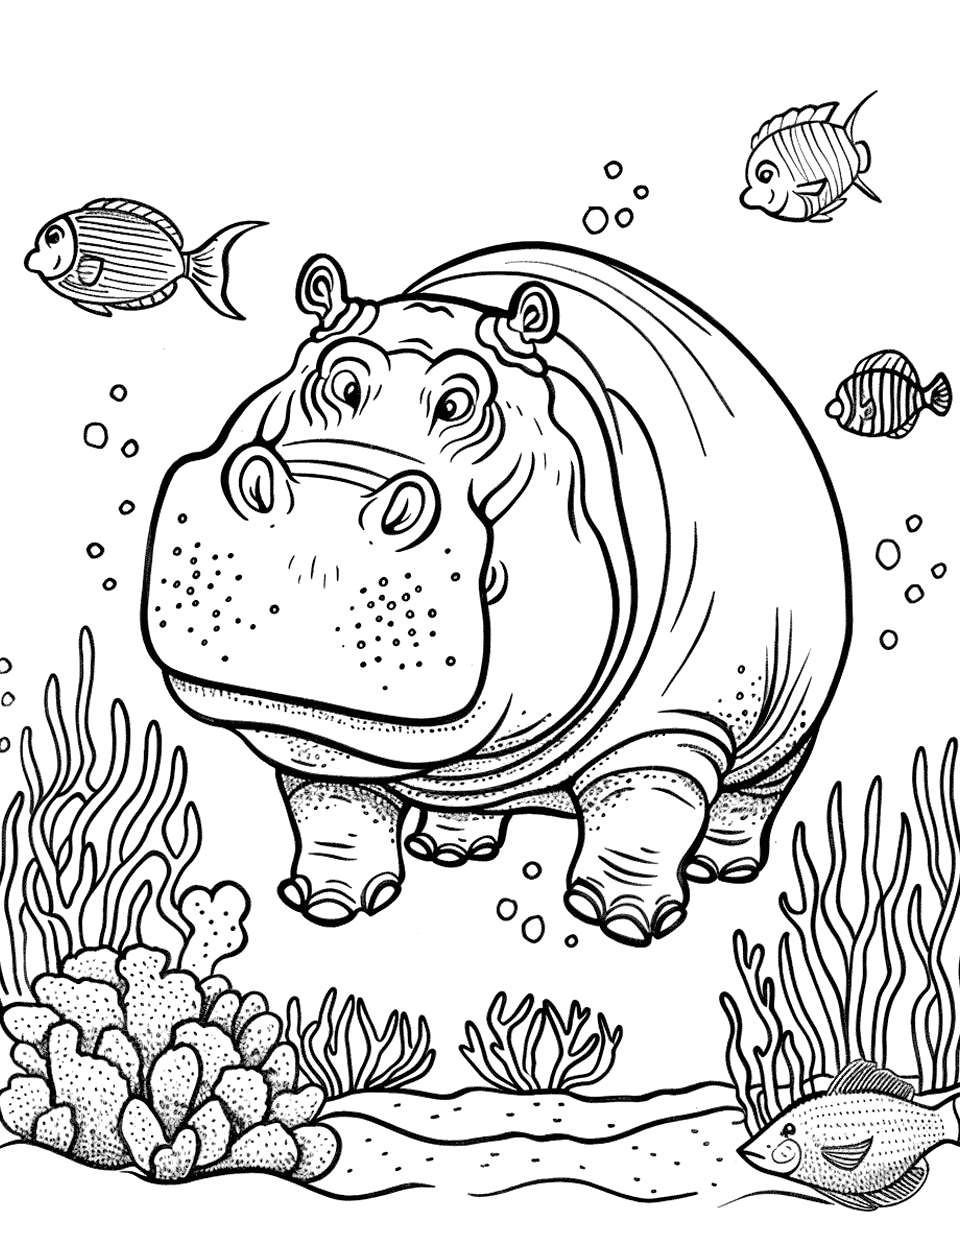 Hippo Underwater Adventure Coloring Page - A hippo swimming underwater, exploring coral reefs and fish.